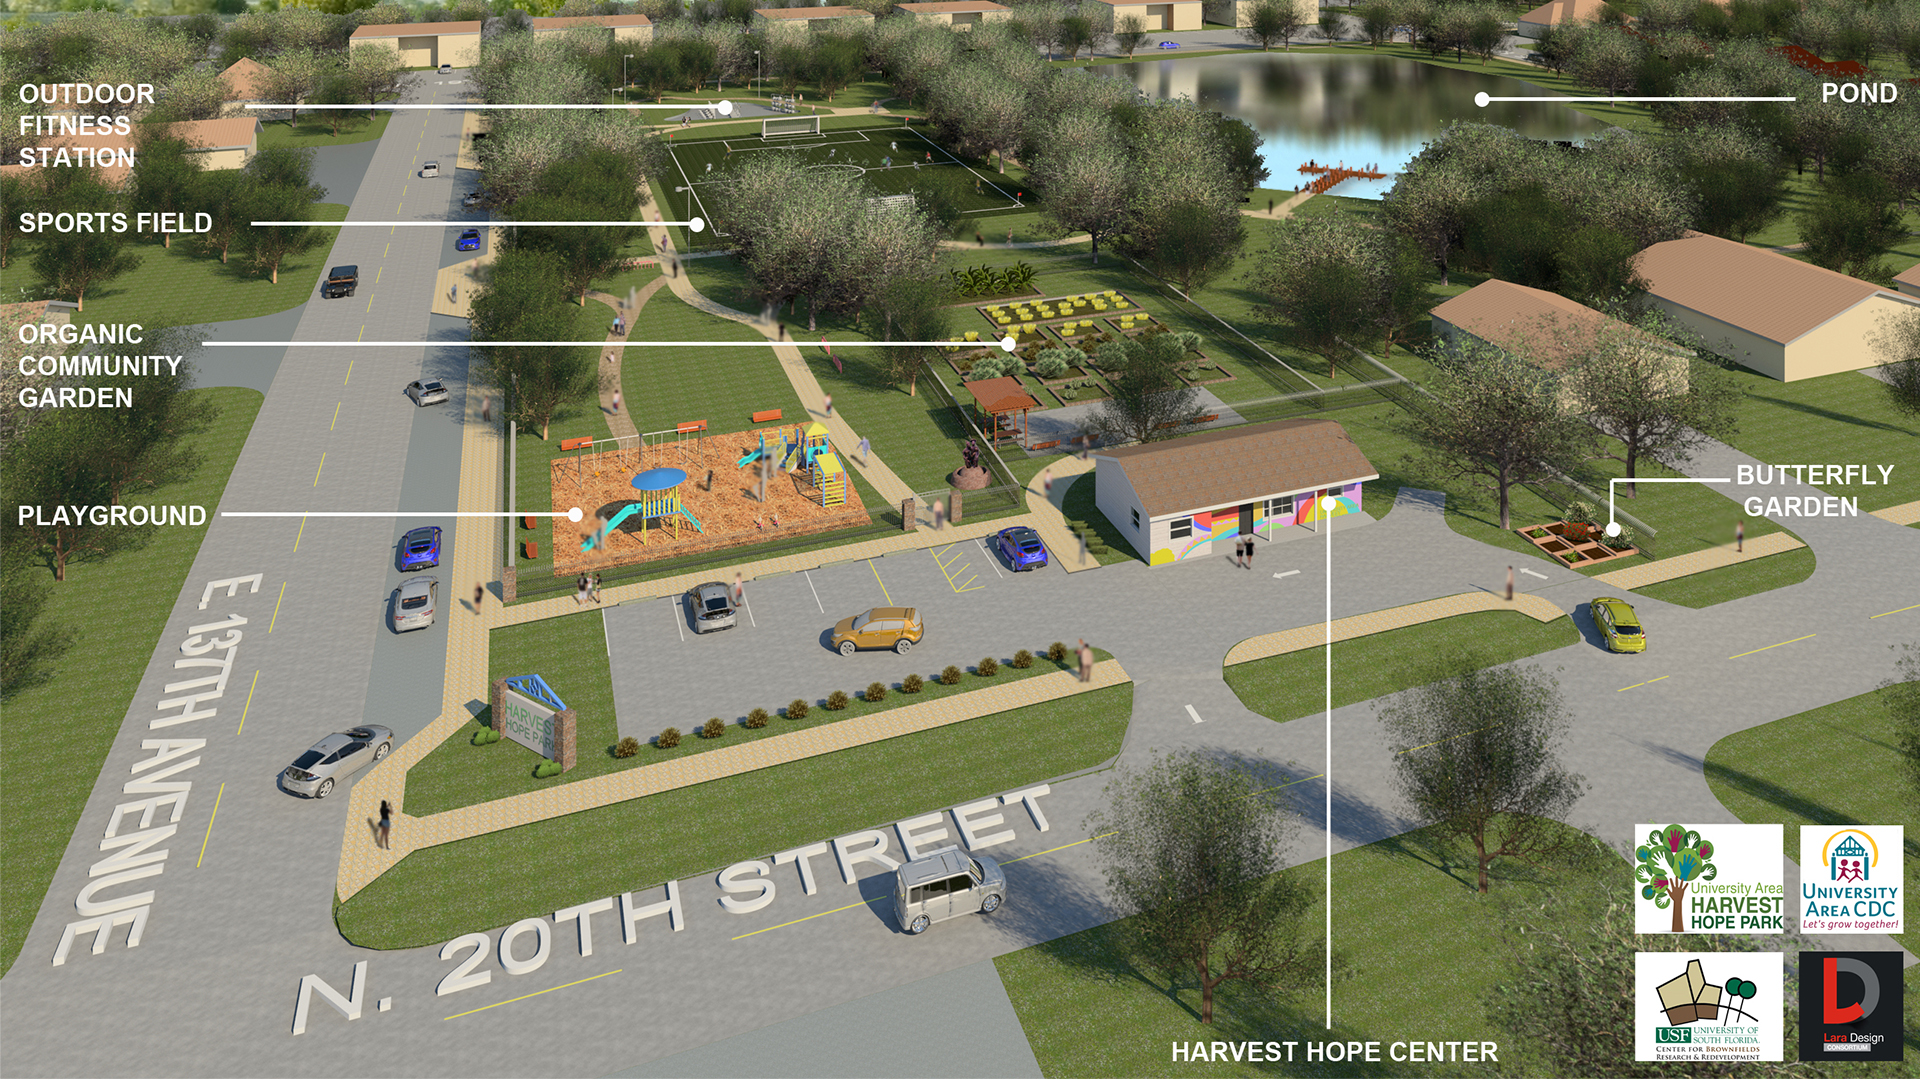 An artist's rendering of the University Area and Harvest Hope Park